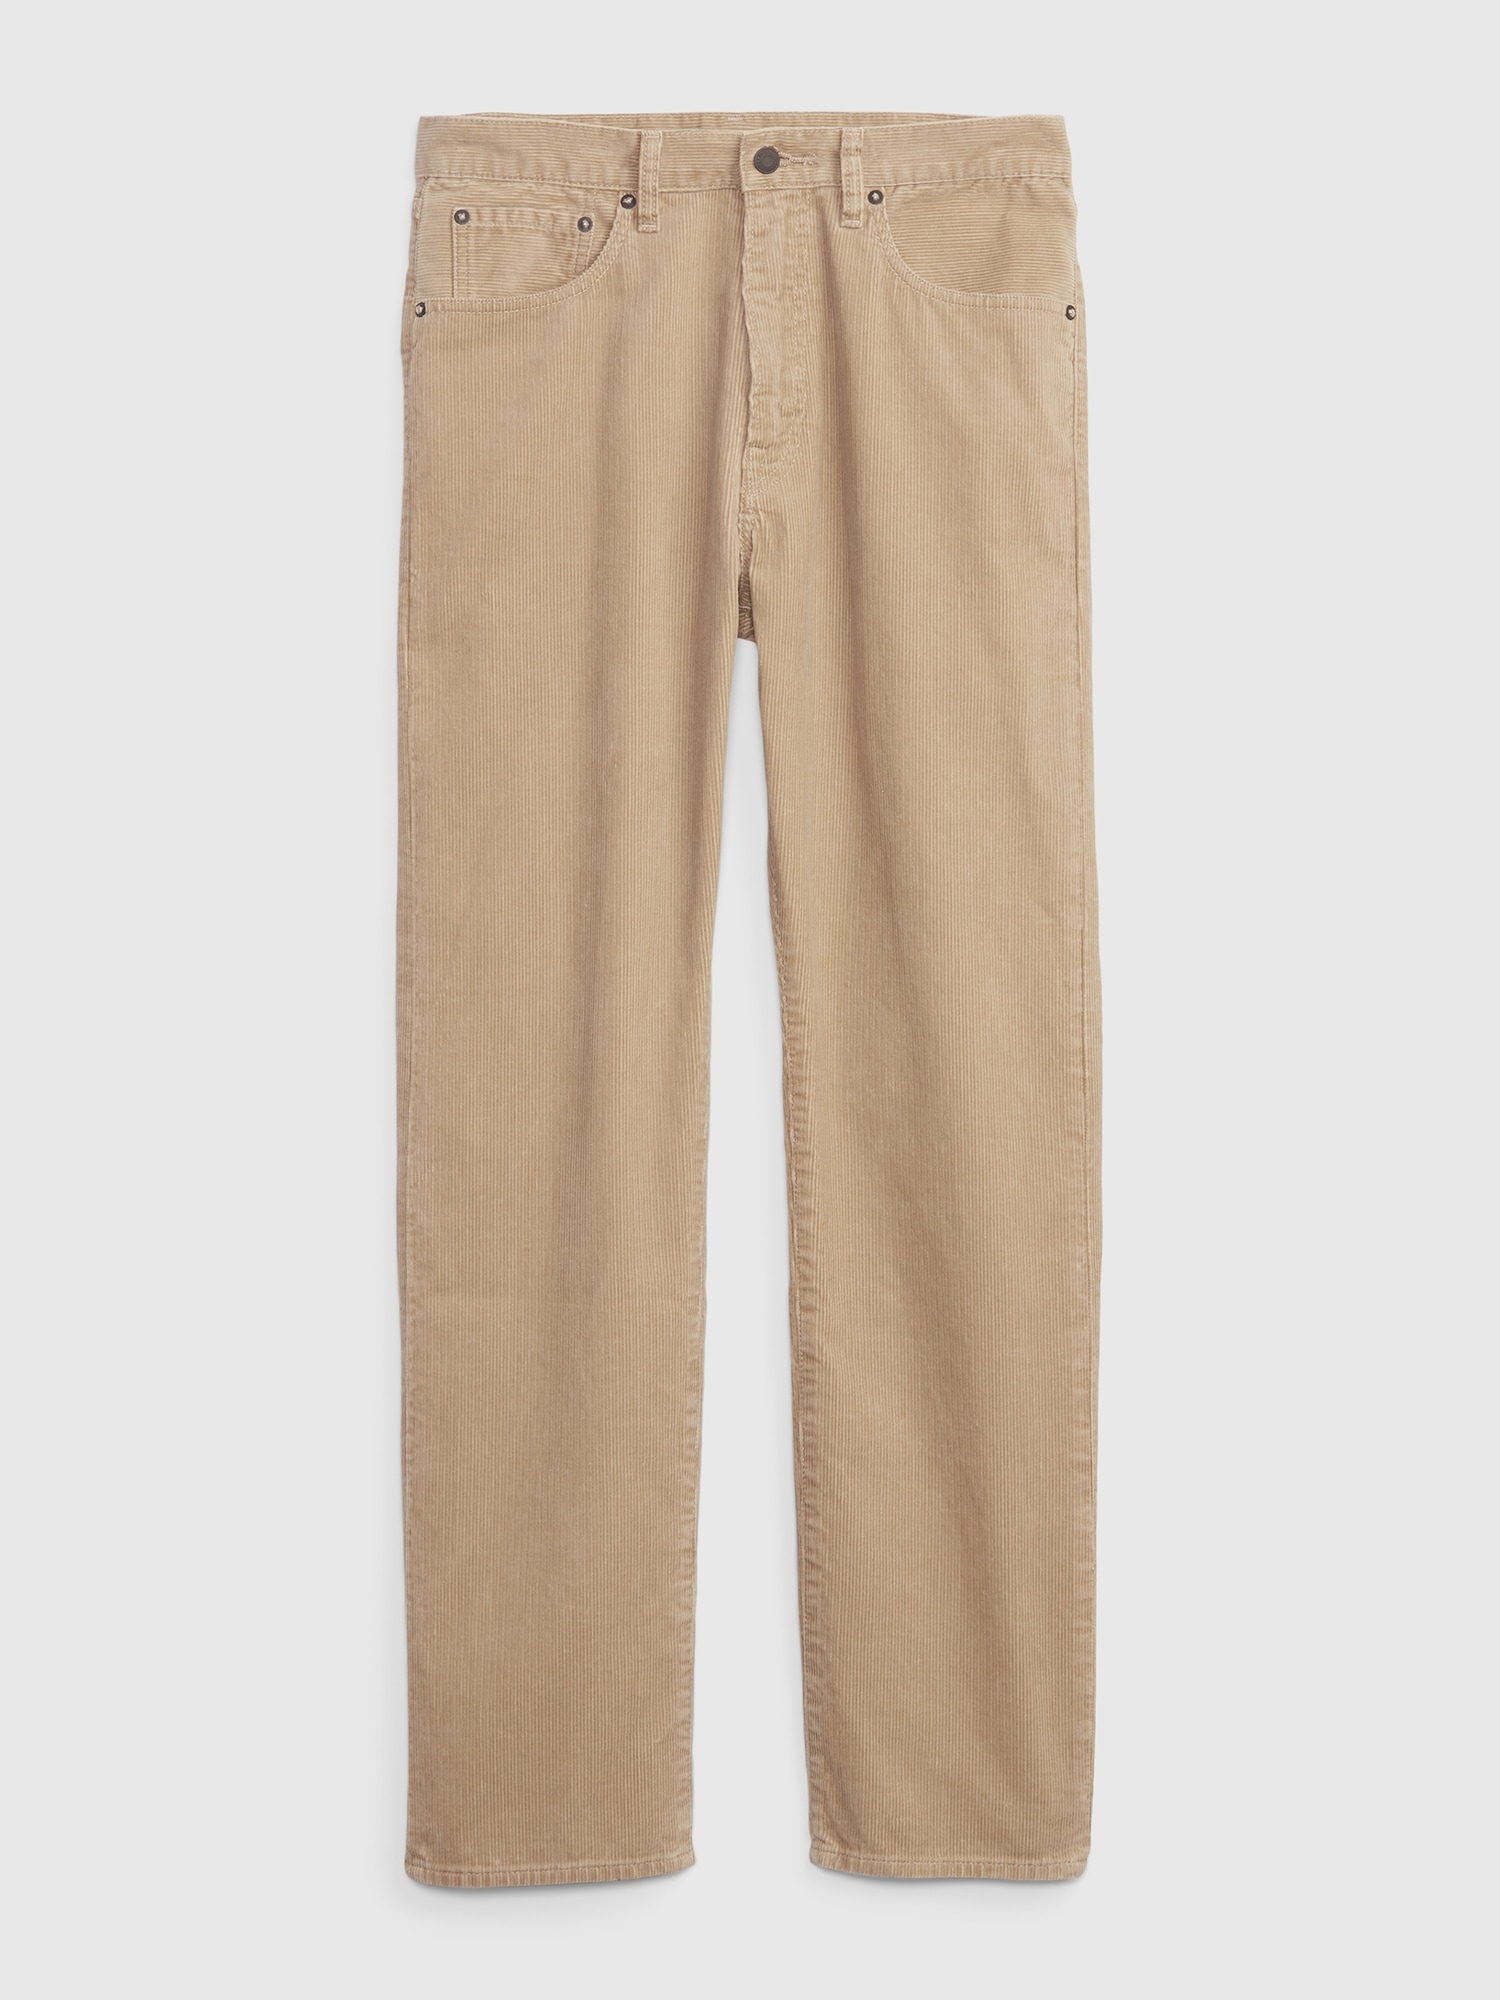 90s Original Straight Fit Corduroy Pants with Washwell | Gap